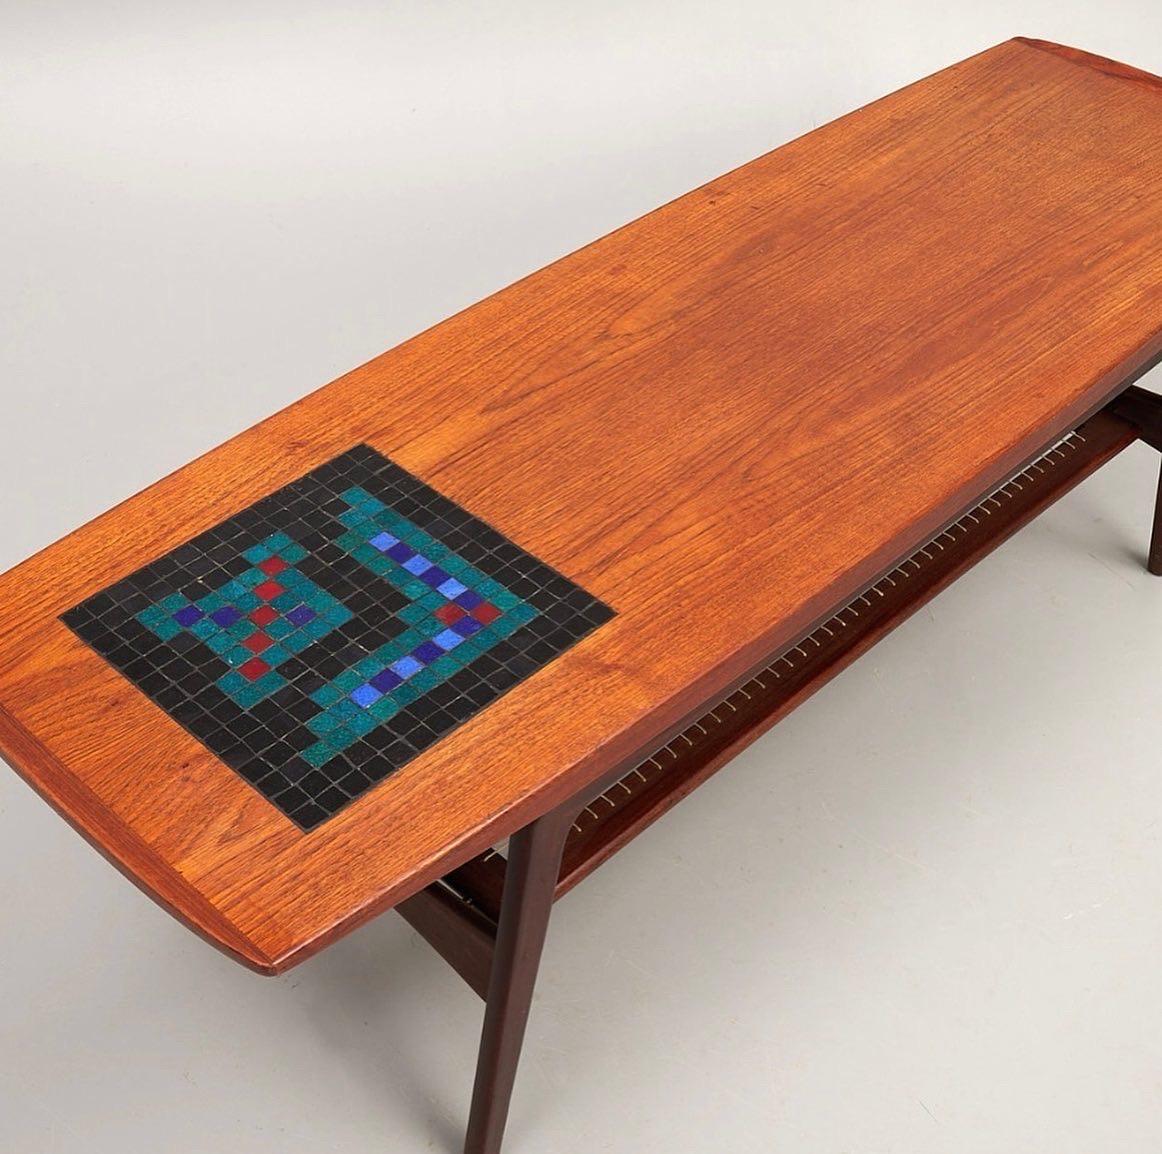 A quintessentially Danish Mid-mod coffee table of solid teak with offset inlaid glass tile mosaic and woven magazine shelf at the underside by Arne Hovmand-Olsen for Mogens Kold. Denmark, 1964.

Measures: 58 inches W x 19 D x 19.